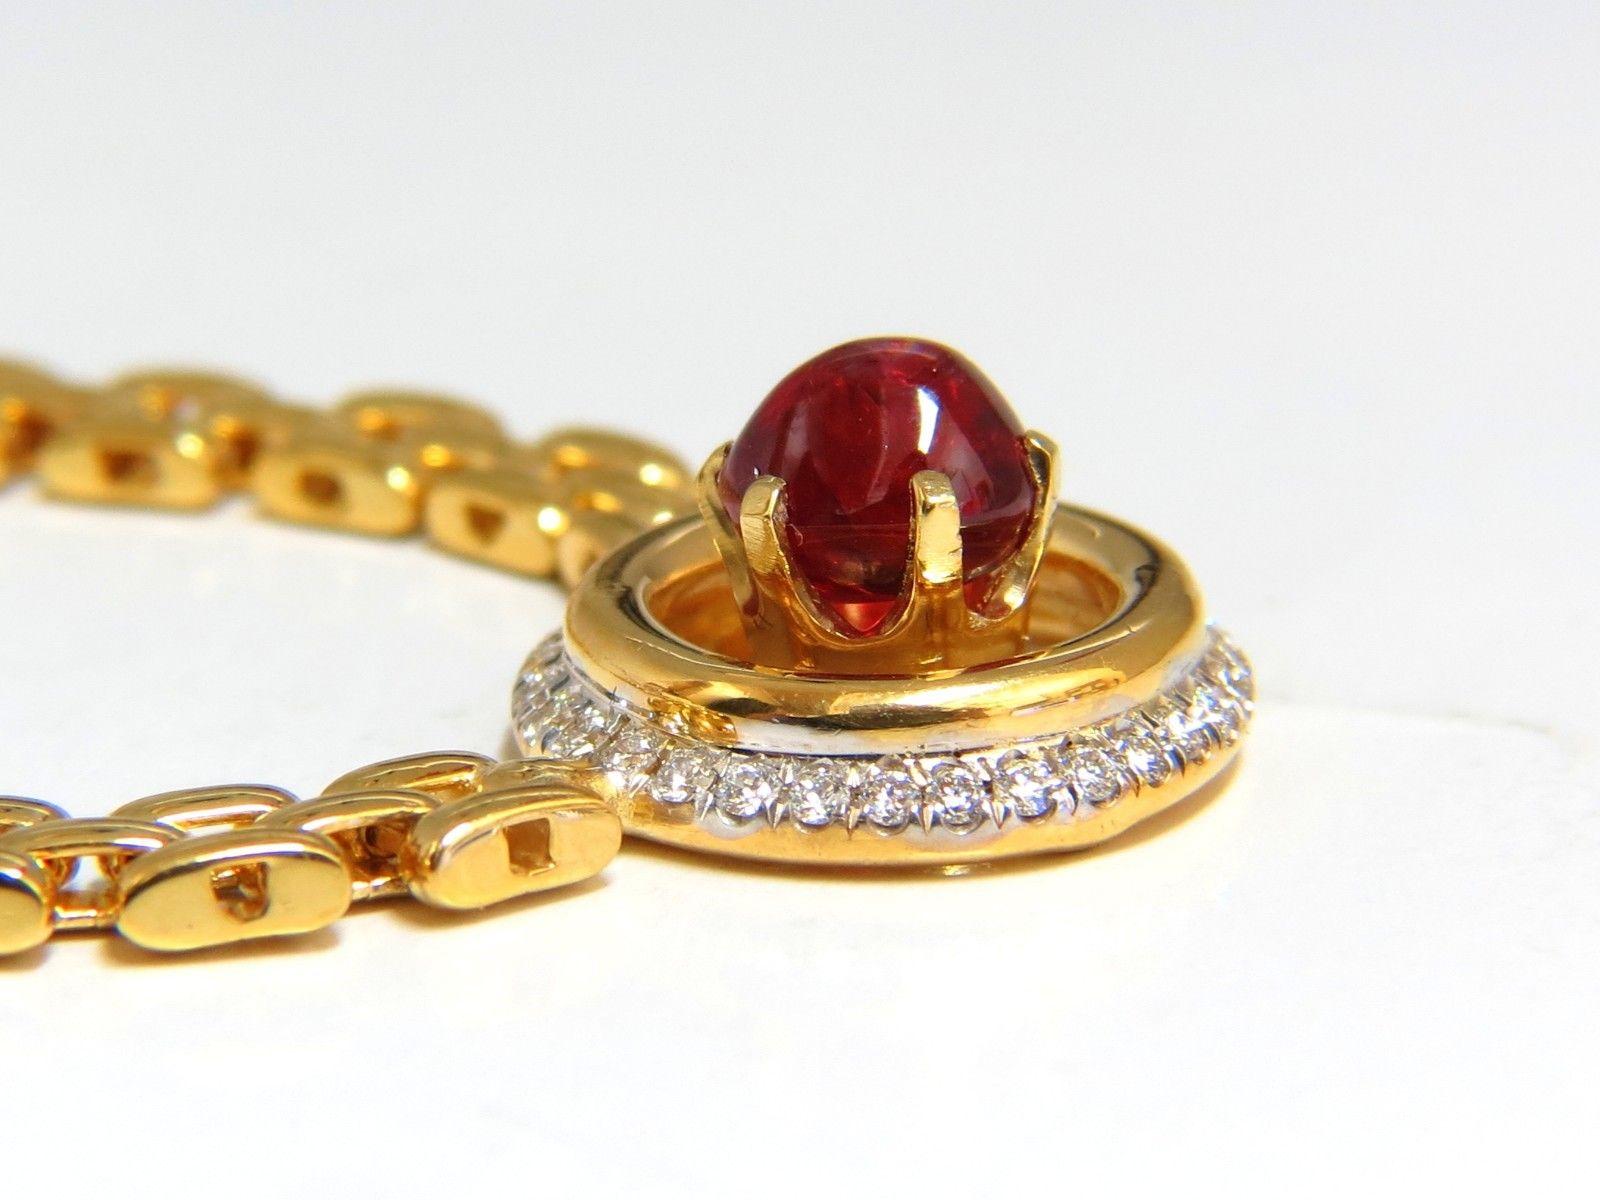 2.00ct. Natural Spinel necklace.

Deep Red color

6.2 x 6.7mm

clarity and transparent.

Diamonds: .36ct.

G-color Vs-2 clarity.

14kt. yellow gold

Necklace: 18.5 Inches.

35.4 grams.

Necklace Chain Caliber: 4.8mm

Diameter of circle on frame: